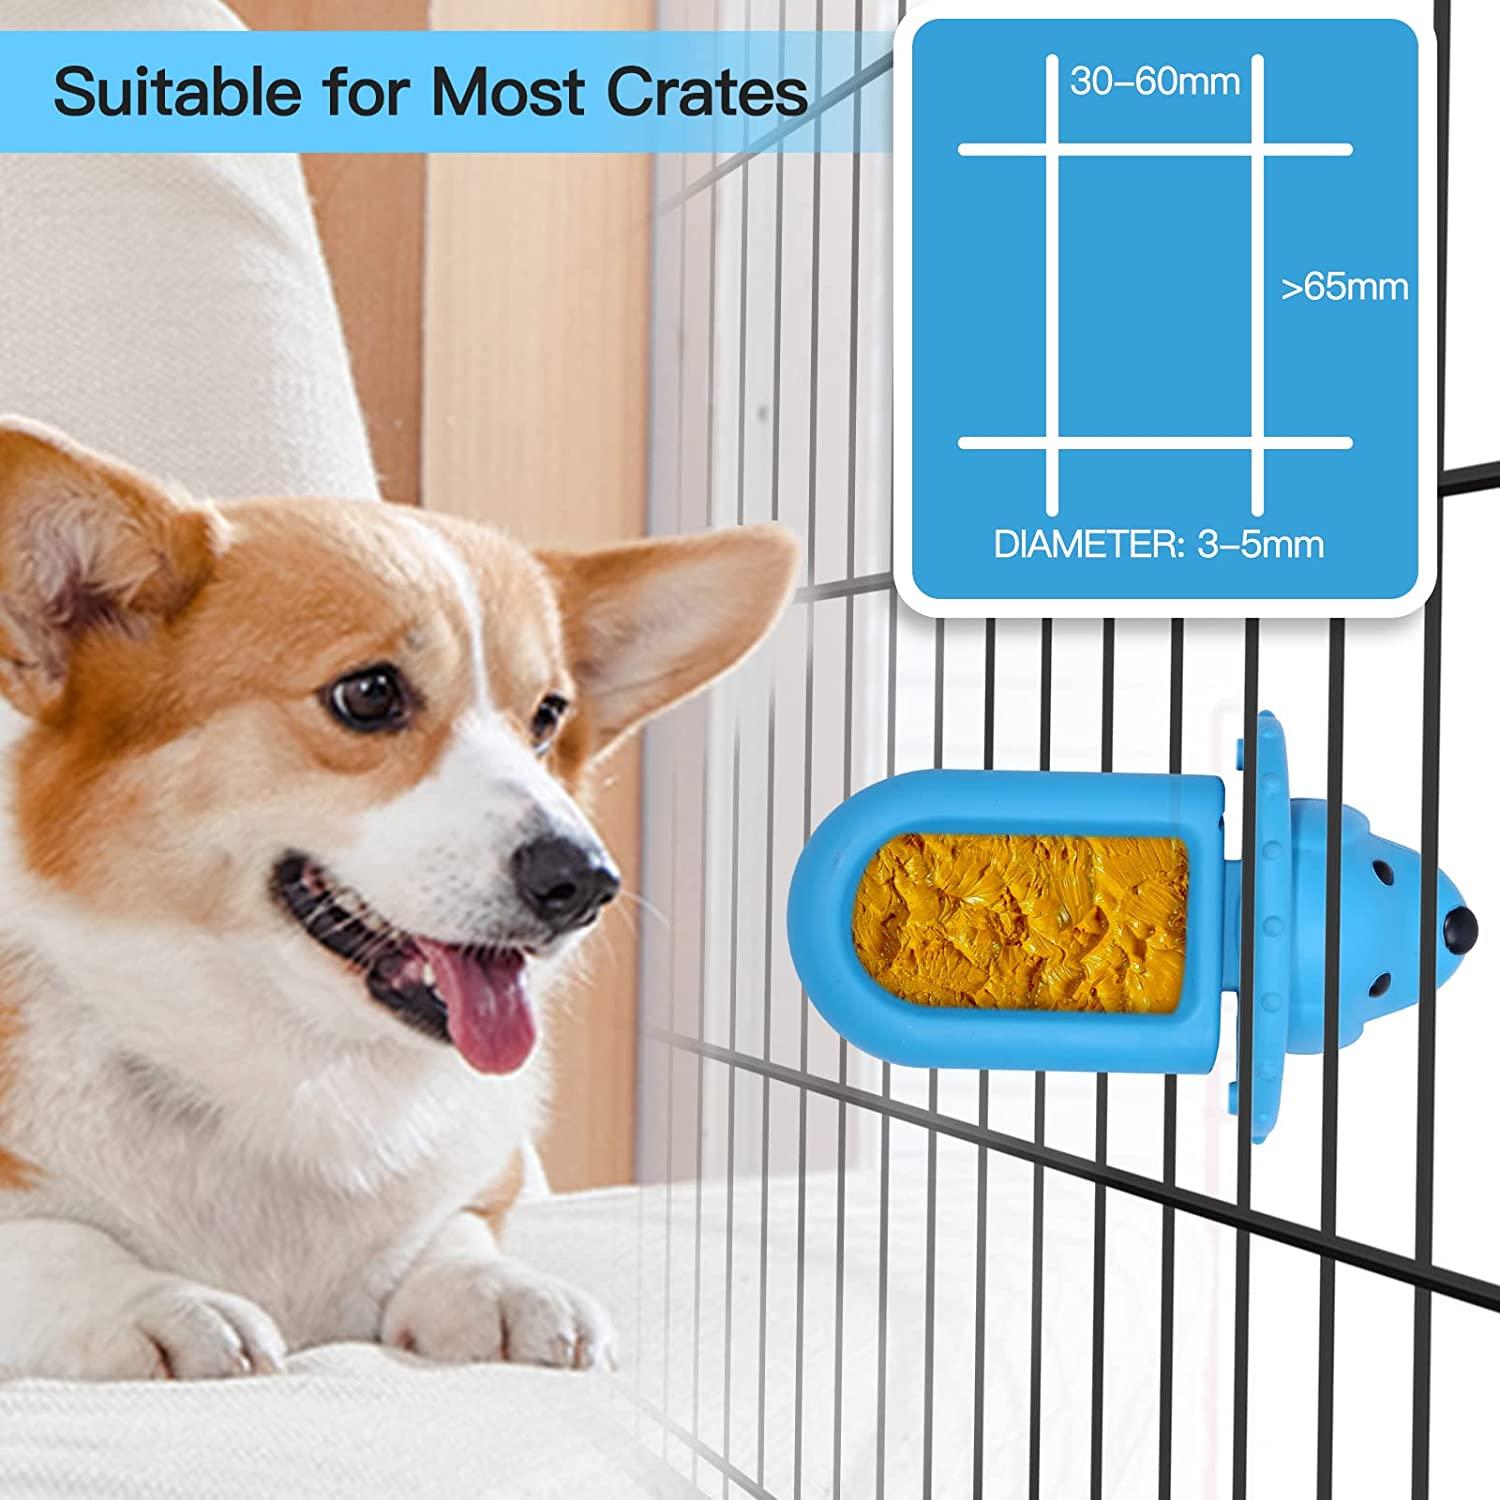 Dog Crate Training Toys/Dog Training Aids，Peanut Butter Toy for Crate  Training, Secures to Crate, Reduces Anxiety，Dog Crate Toy